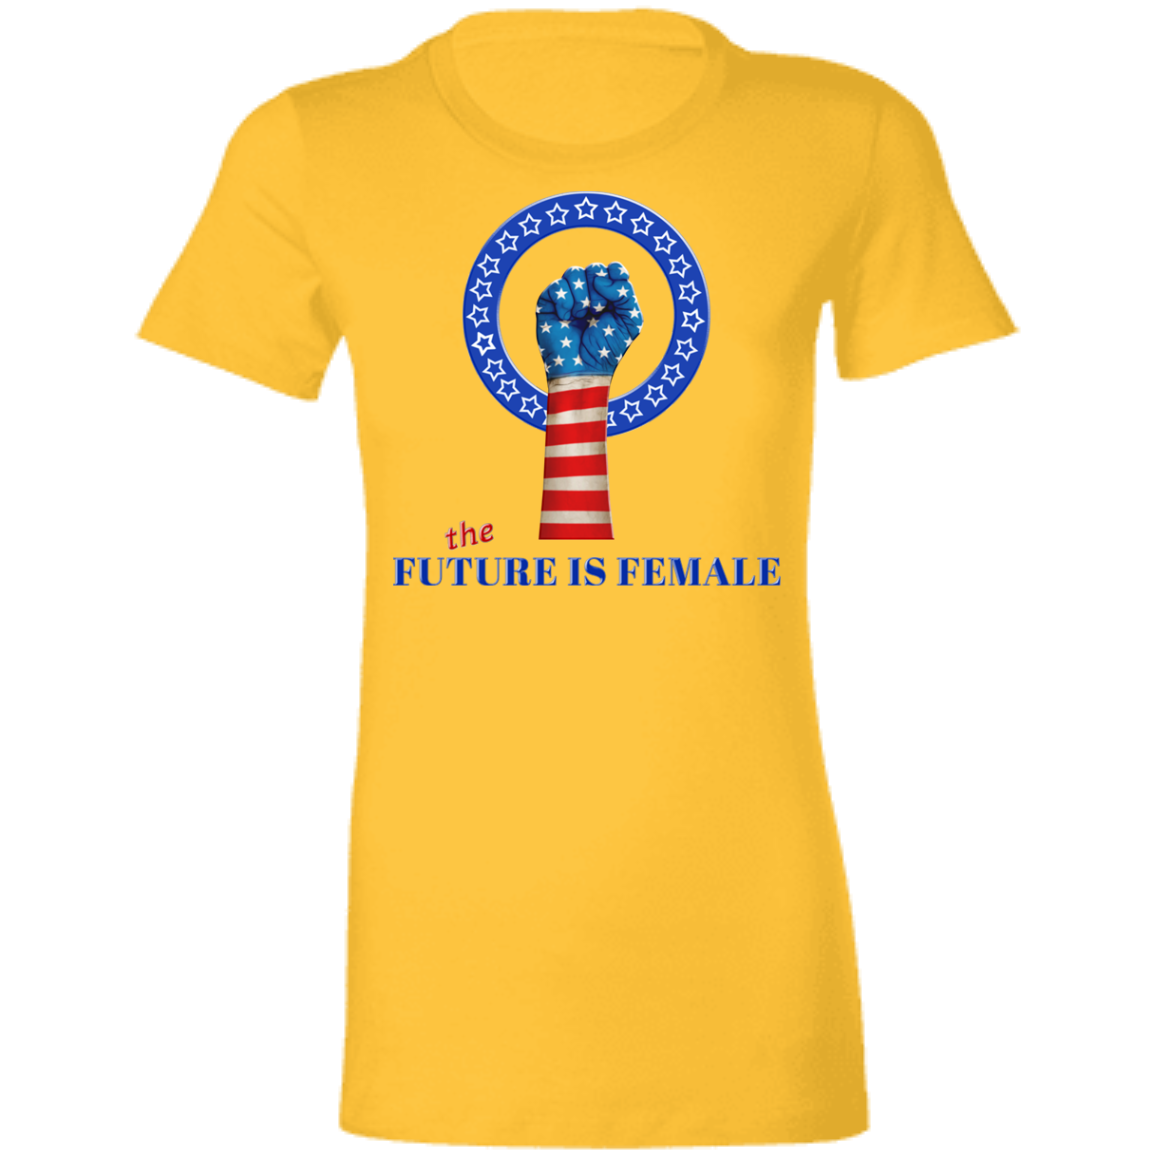 The Future Is Female - Women's Fitted T-Shirt